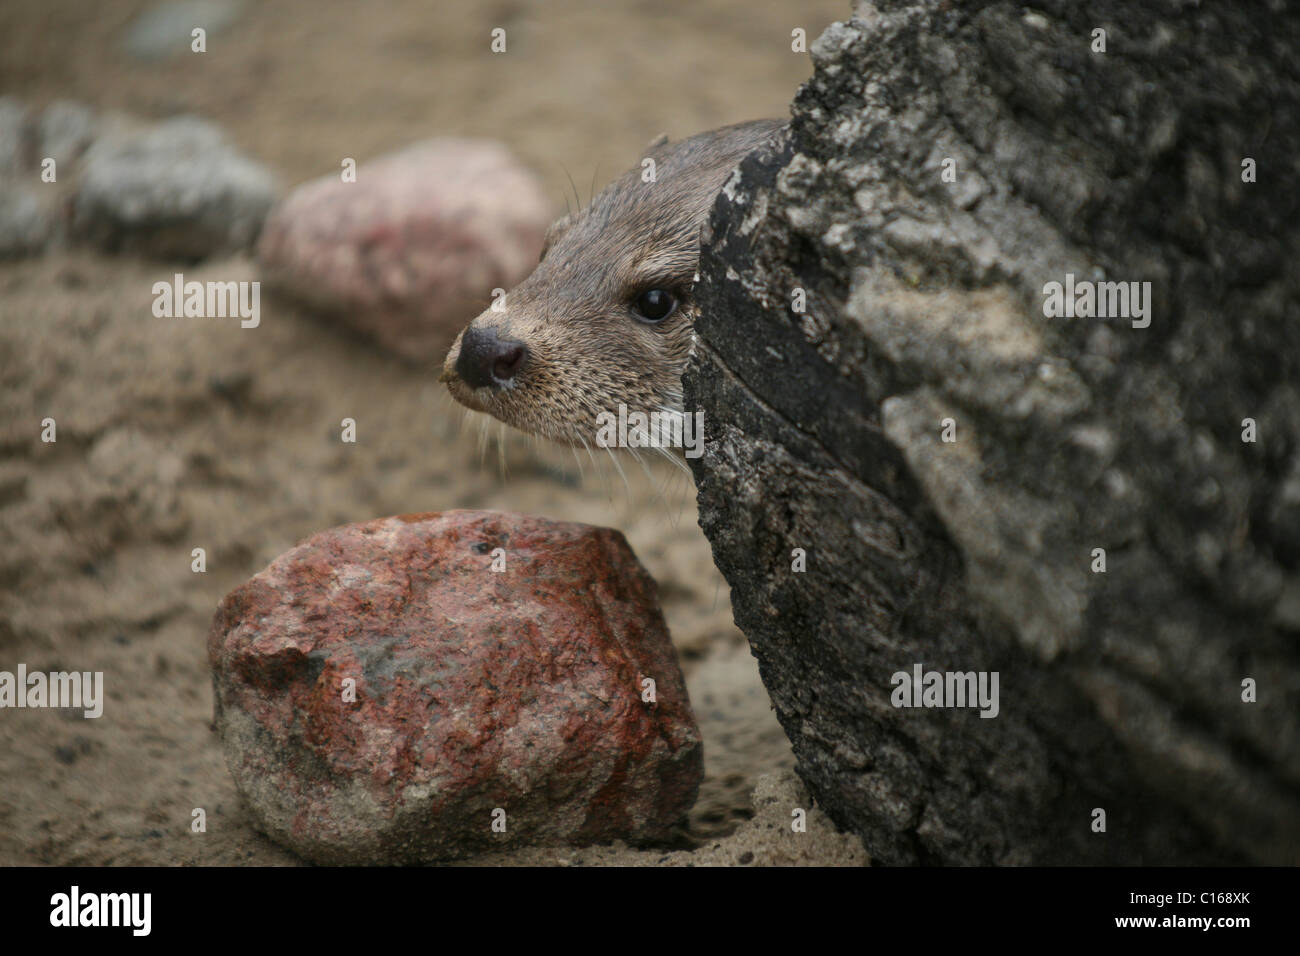 Eurasian Otter or Common Otter (Lutra lutra) peeking out from behind a tree stump Stock Photo